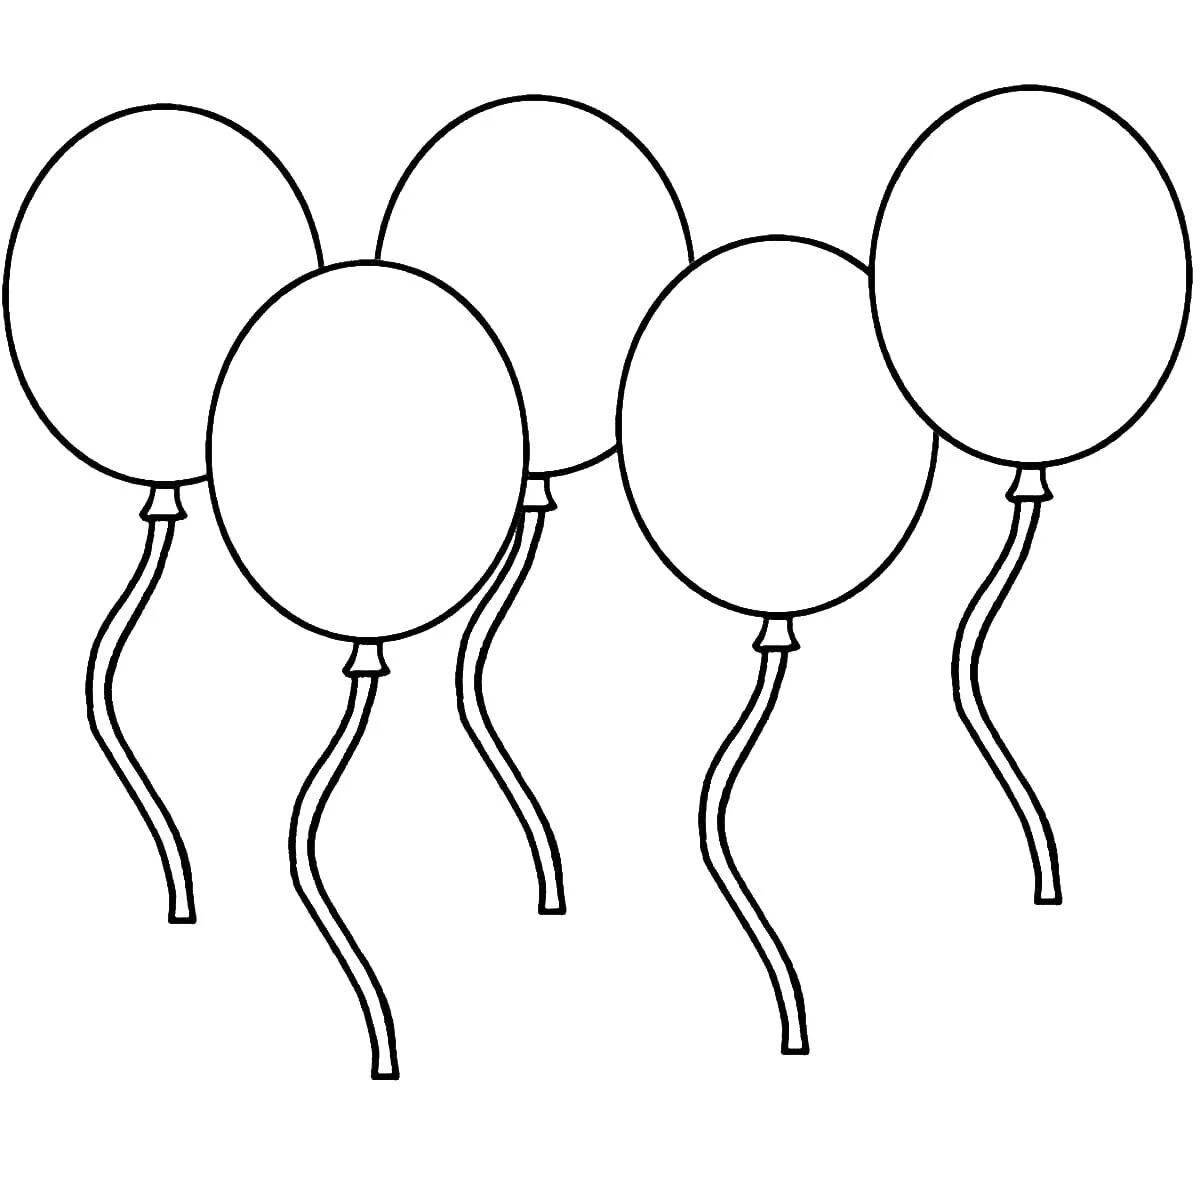 Coloring pages with colorful balloons for children 2-3 years old